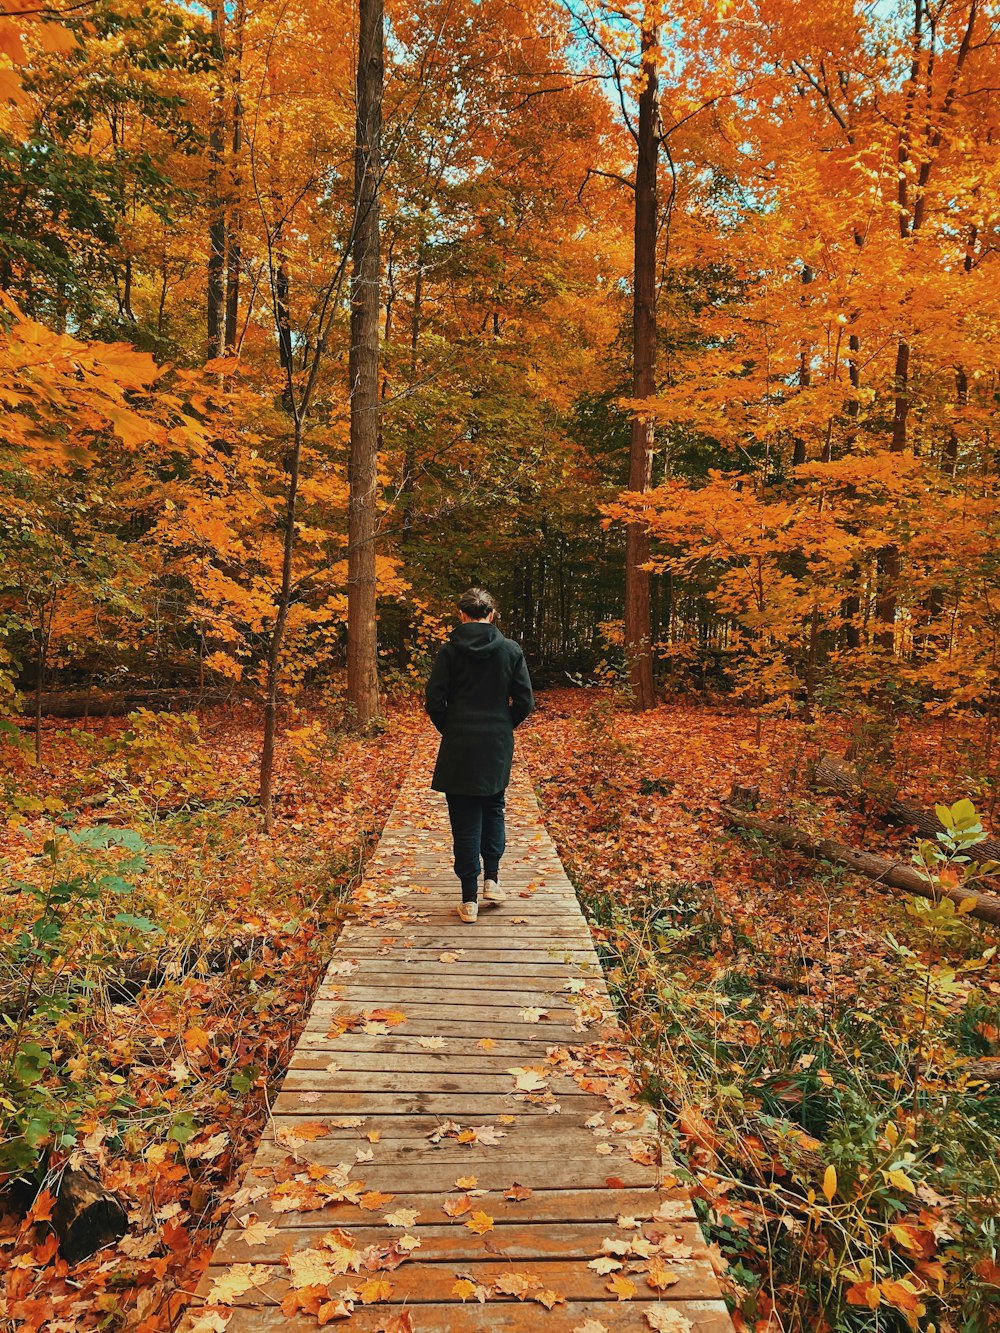 man in black jacket walking on wooden pathway surrounded by trees during daytime